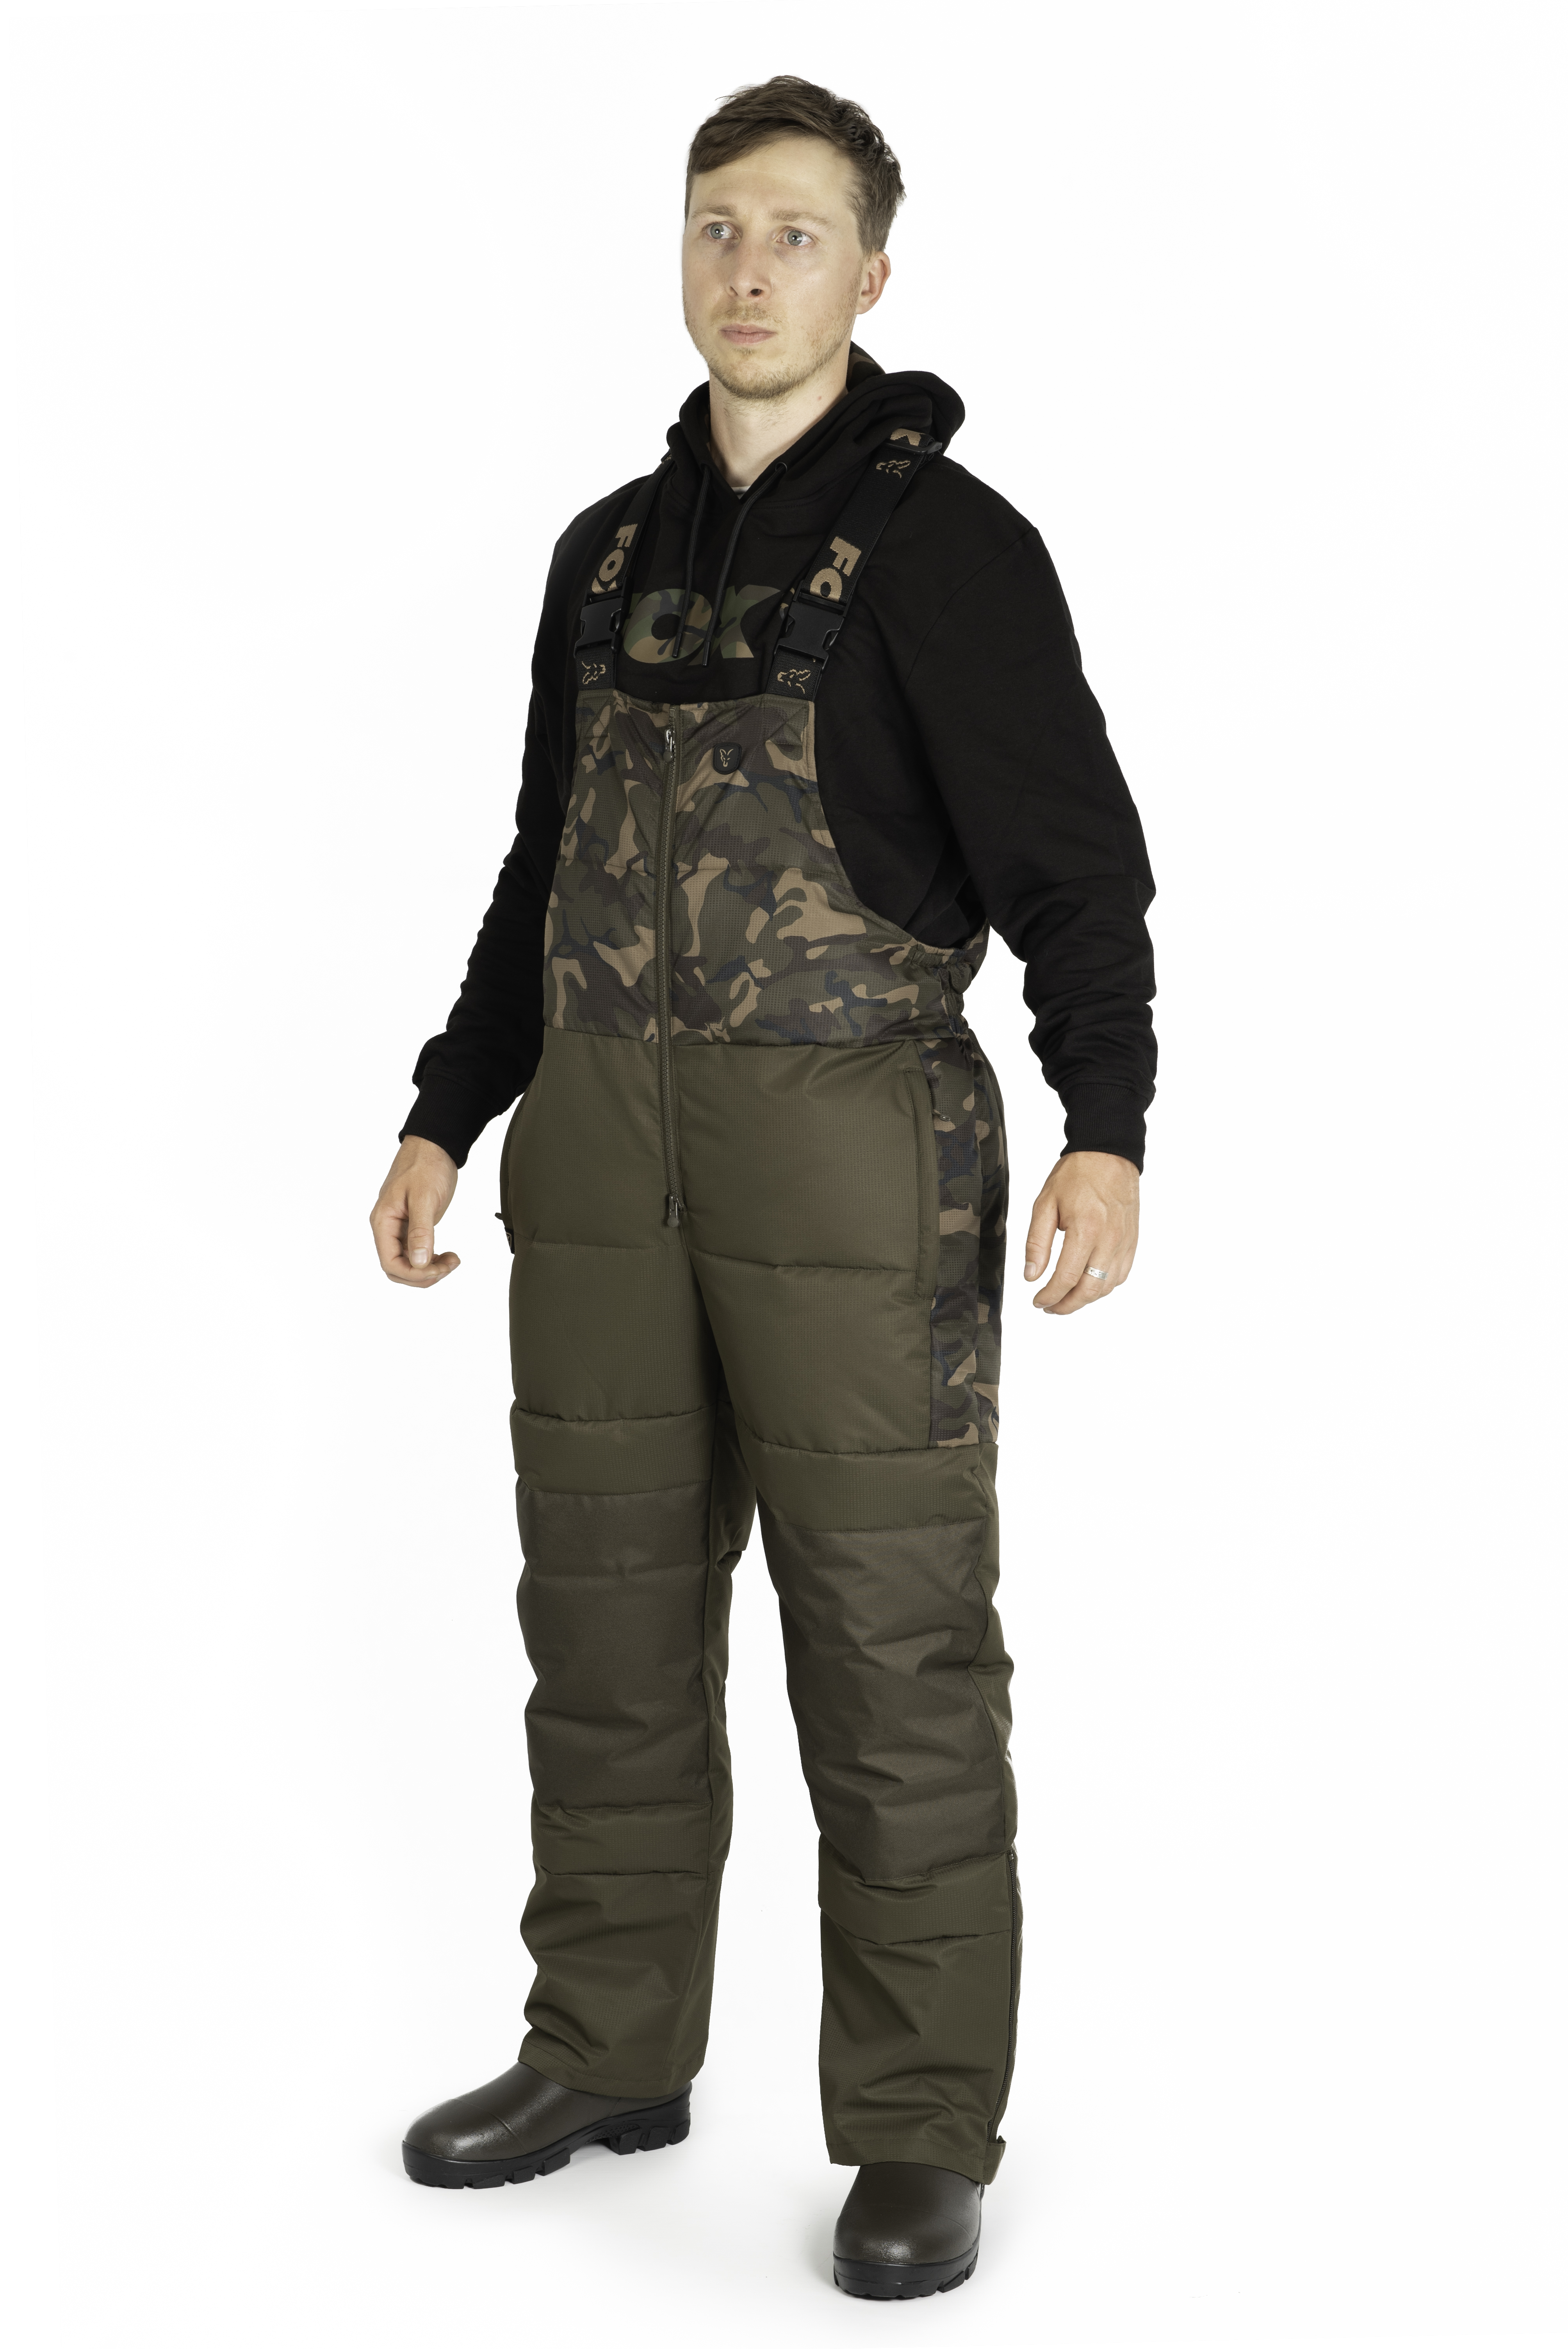 Fox RS Quilted Salopettes Camo Khaki Large